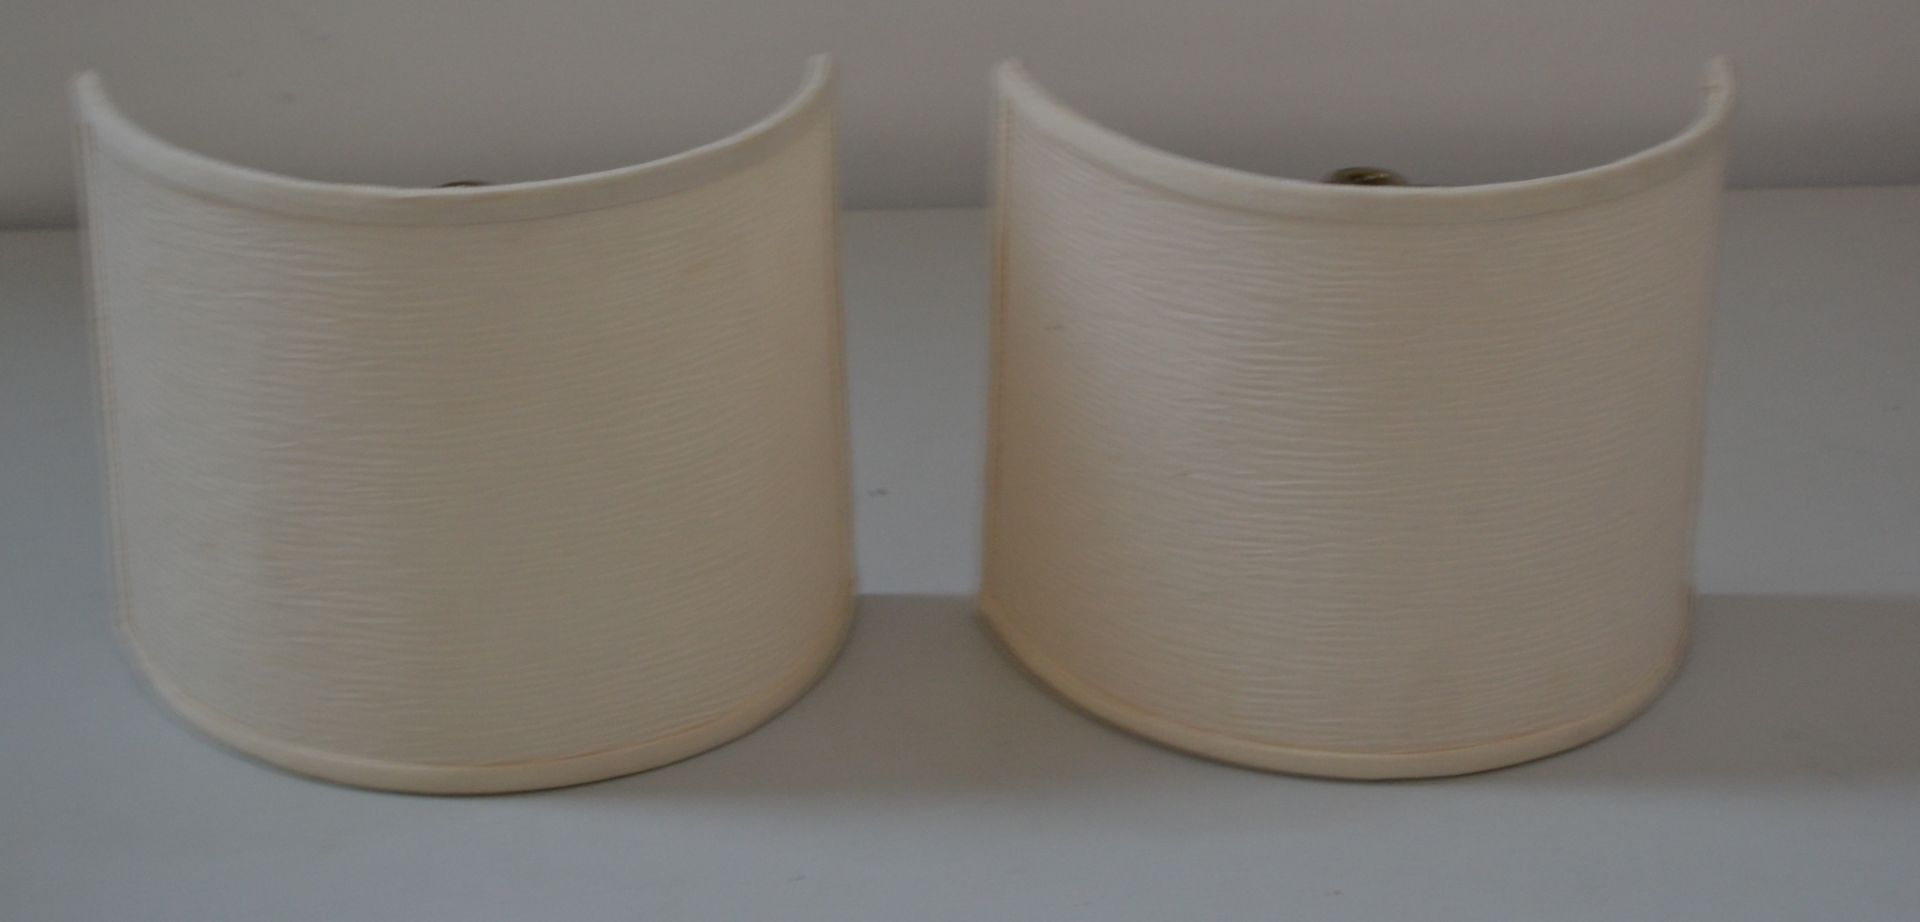 1 x Pair of Wall Light Shades In Cream And Buzzi & Buzzi White Wall Light - Ref J2191 - CL314 - Image 3 of 4